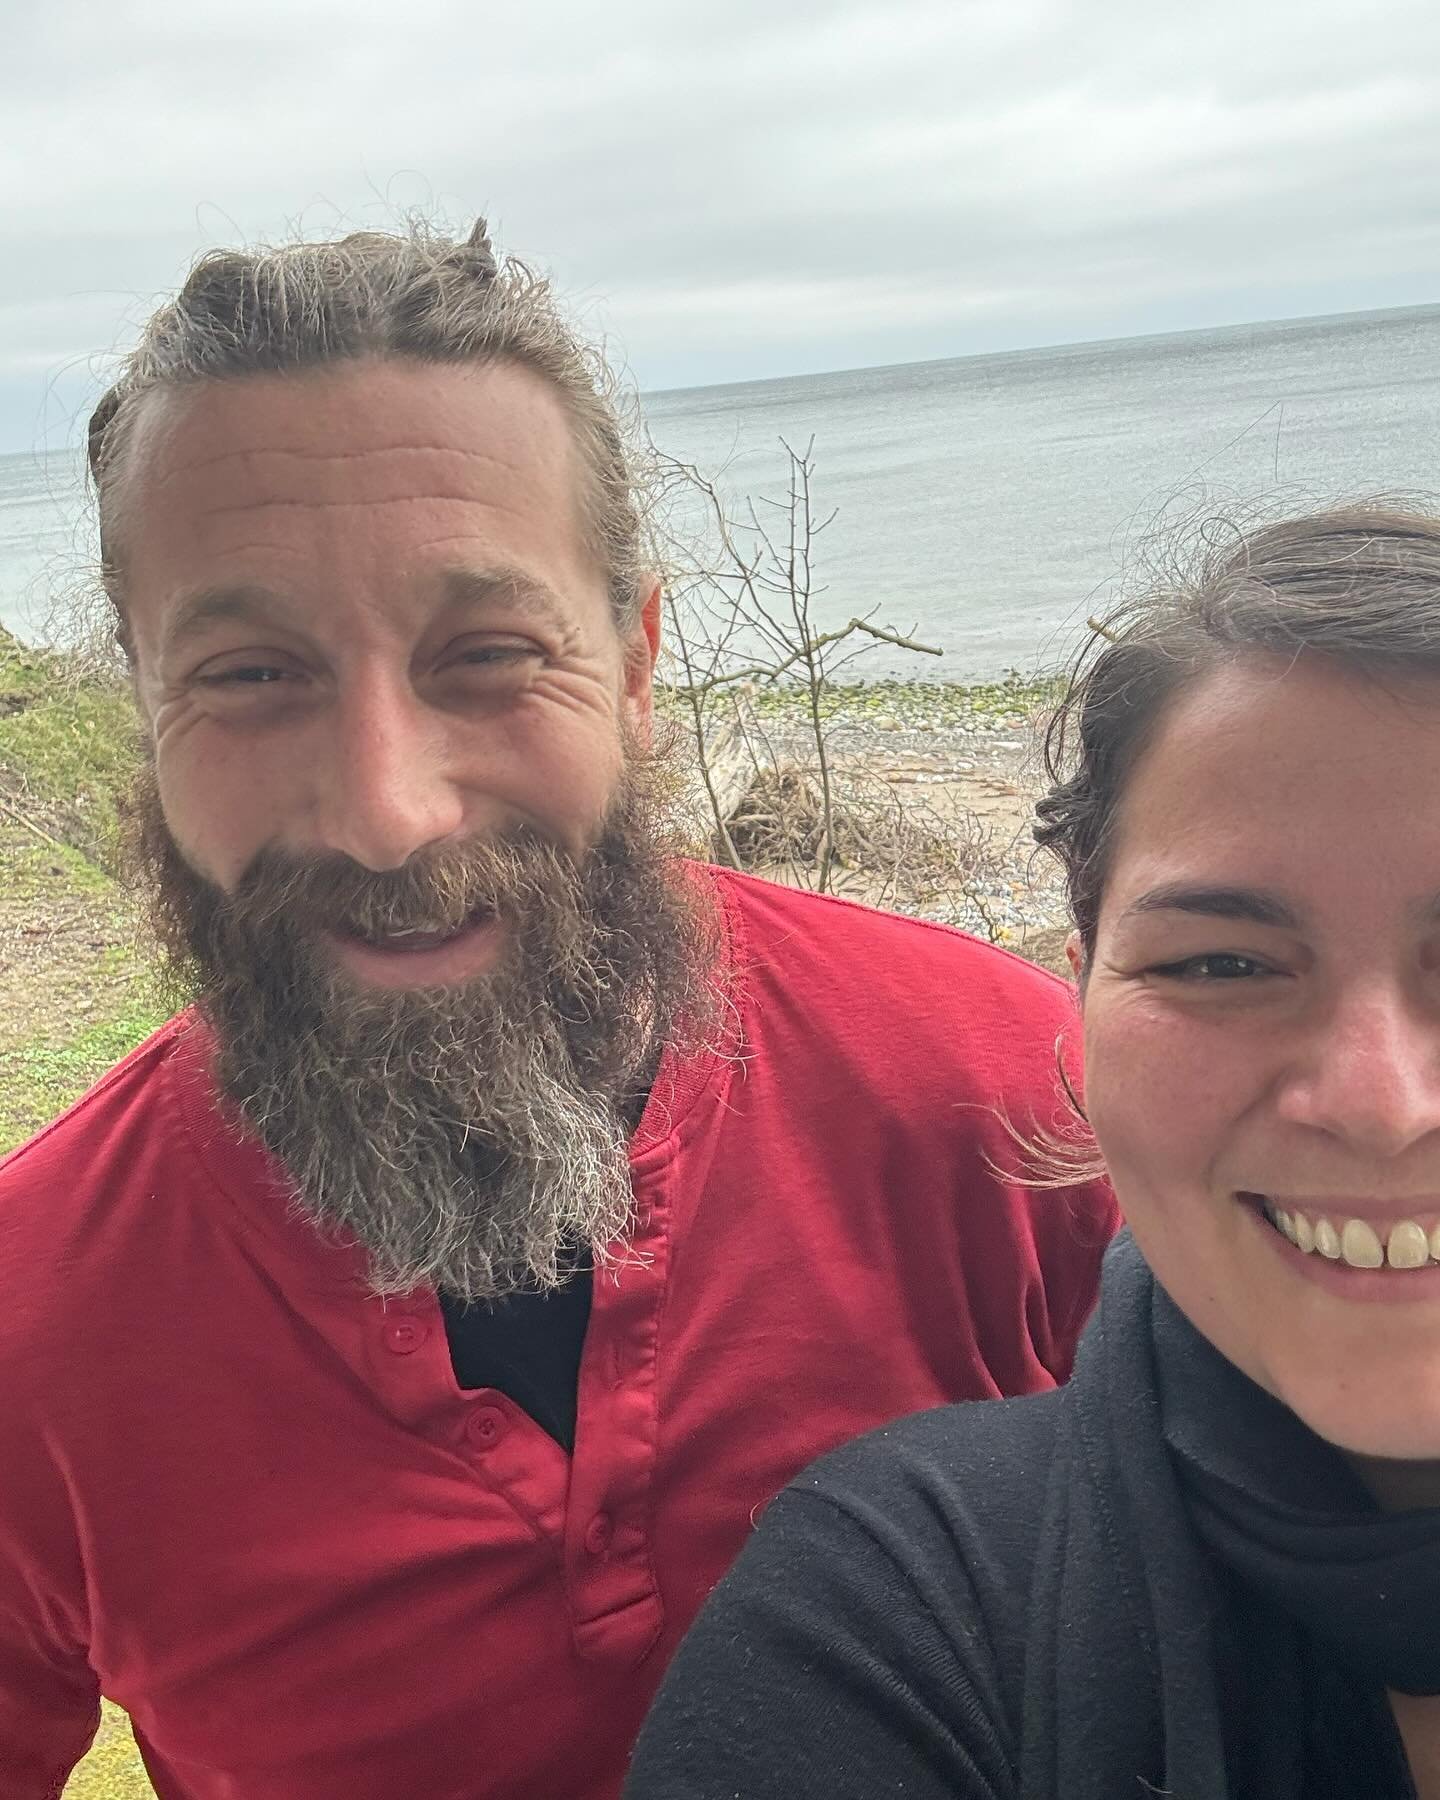 Got to spend time with this awesome human this morning on a bank by the water - in Denmark @luke.holistic.survival.school 🔥 like sitting down with an old friend. Also received the most amazing gift - a jar of Bear fat, such a precious present. I lov